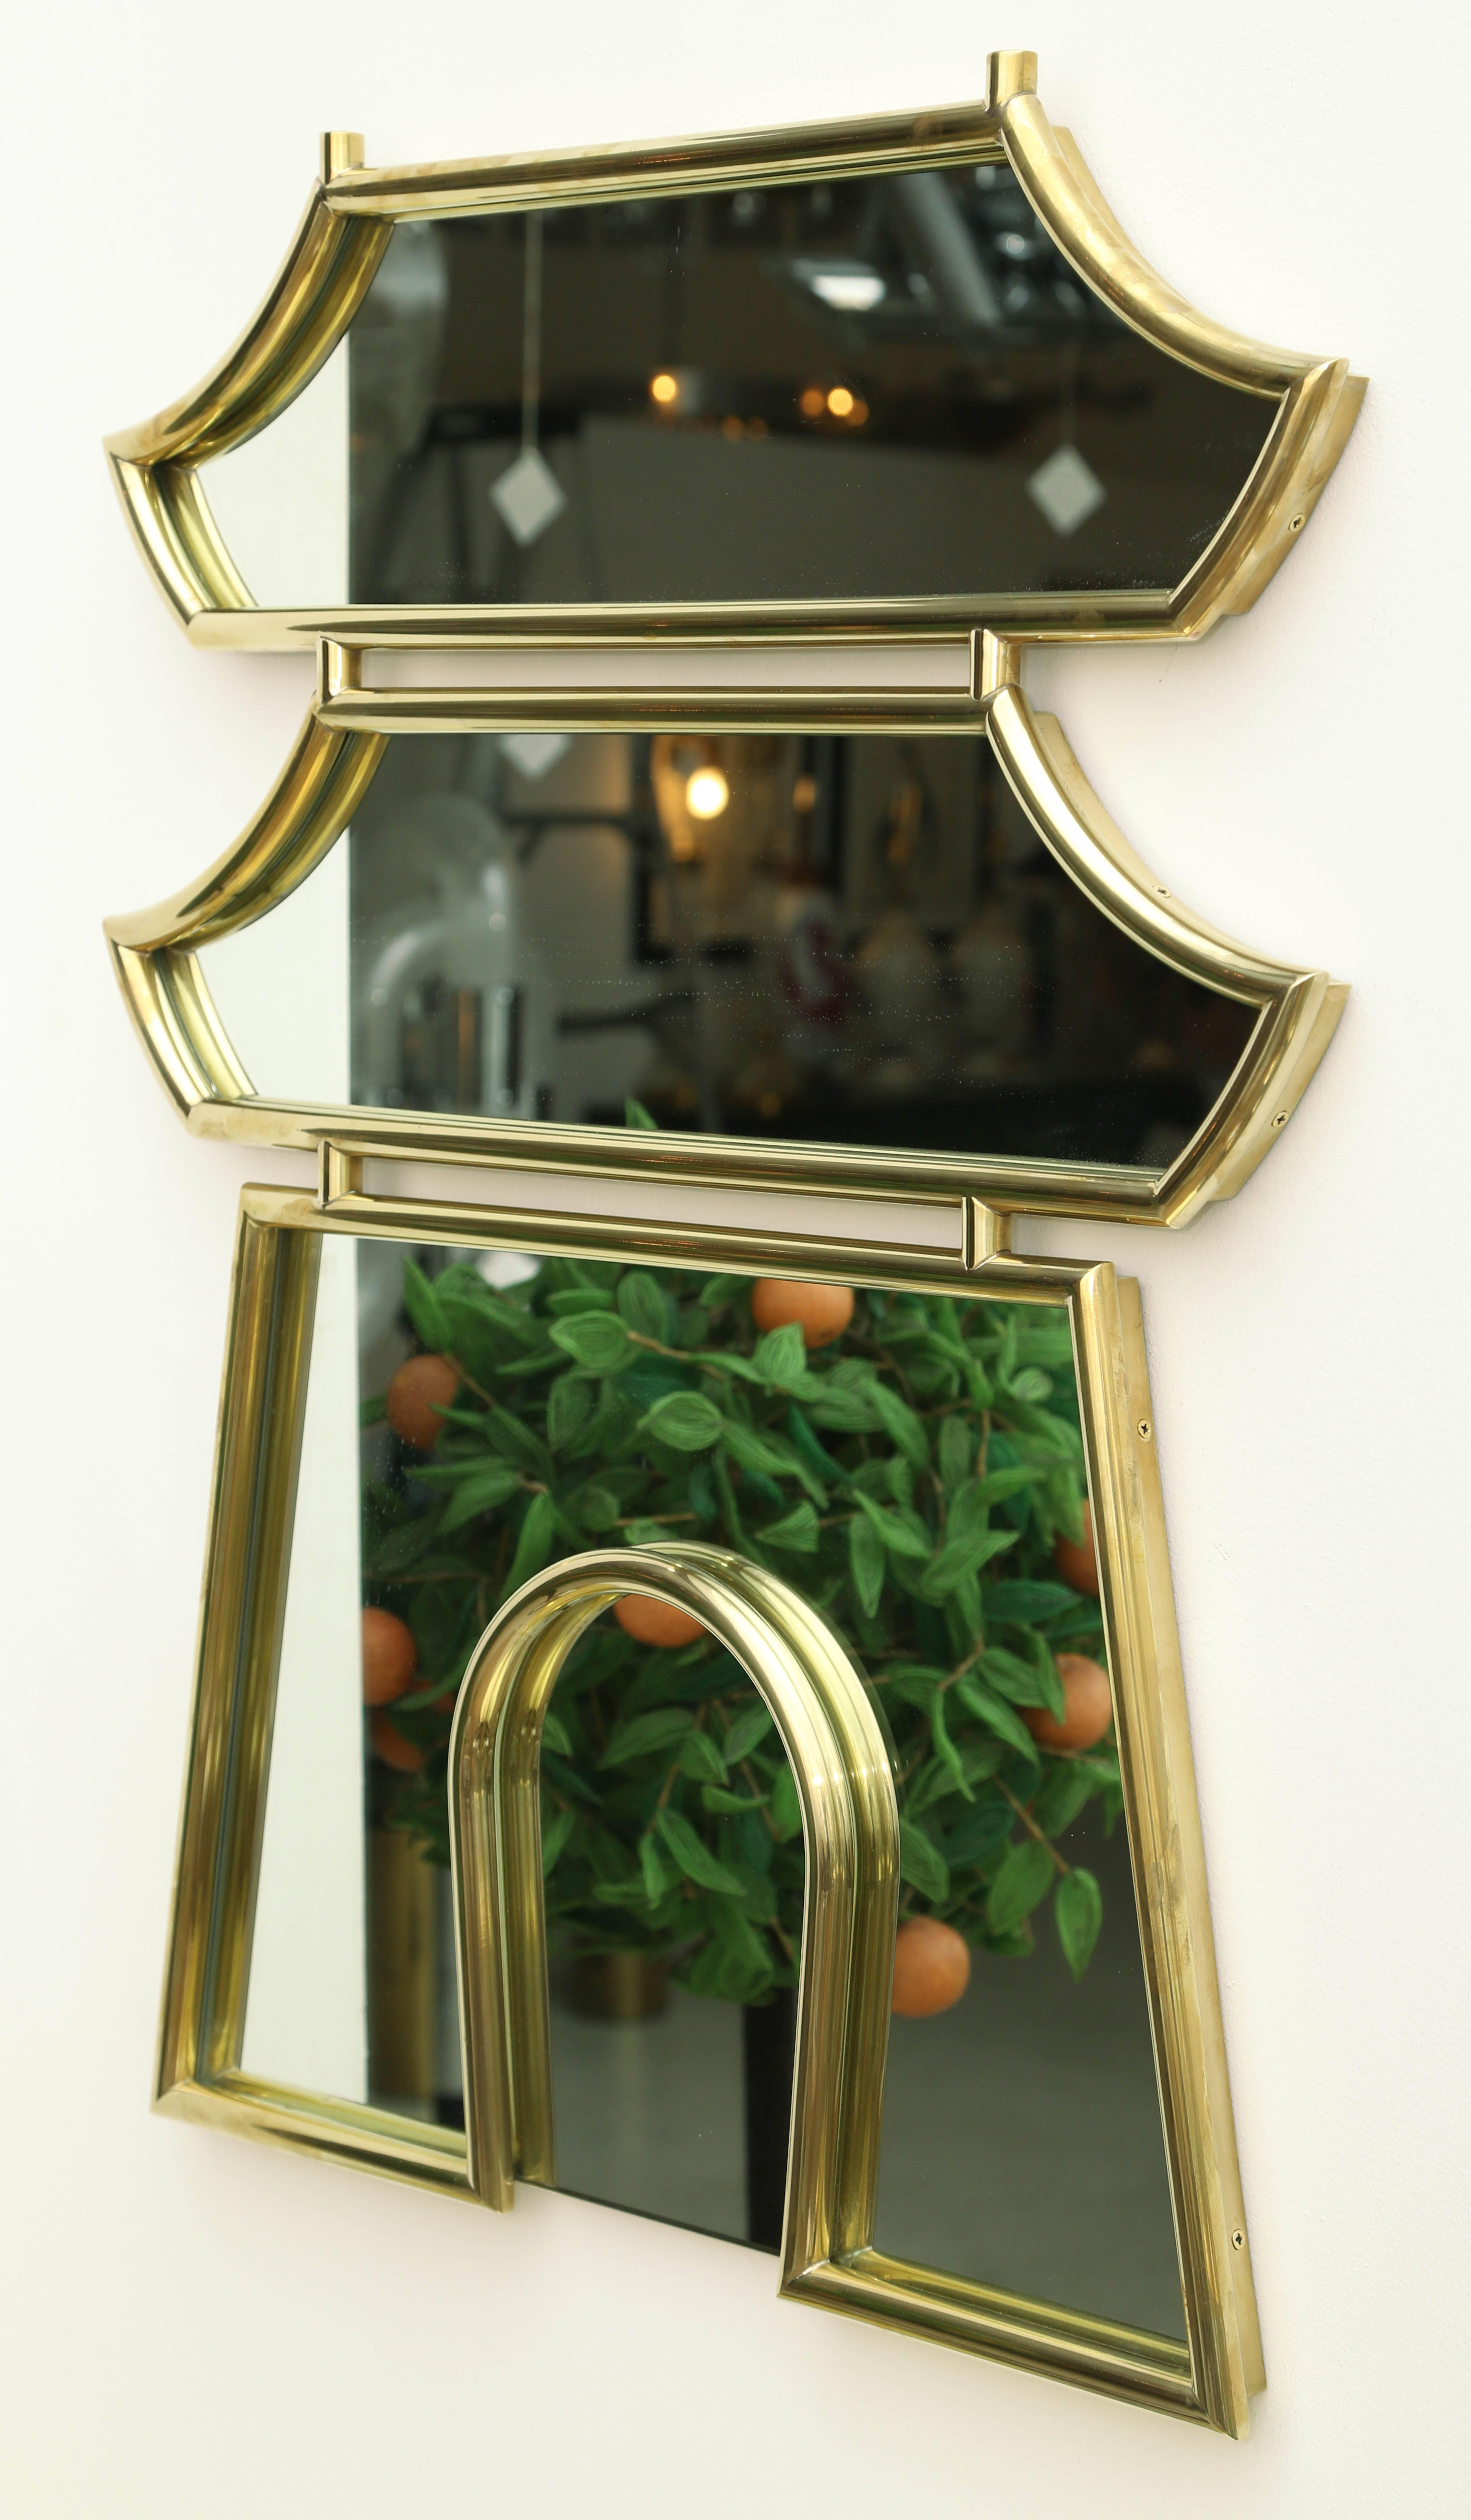 Polished brass pagoda shaped mirror made in Italy, 1970s.